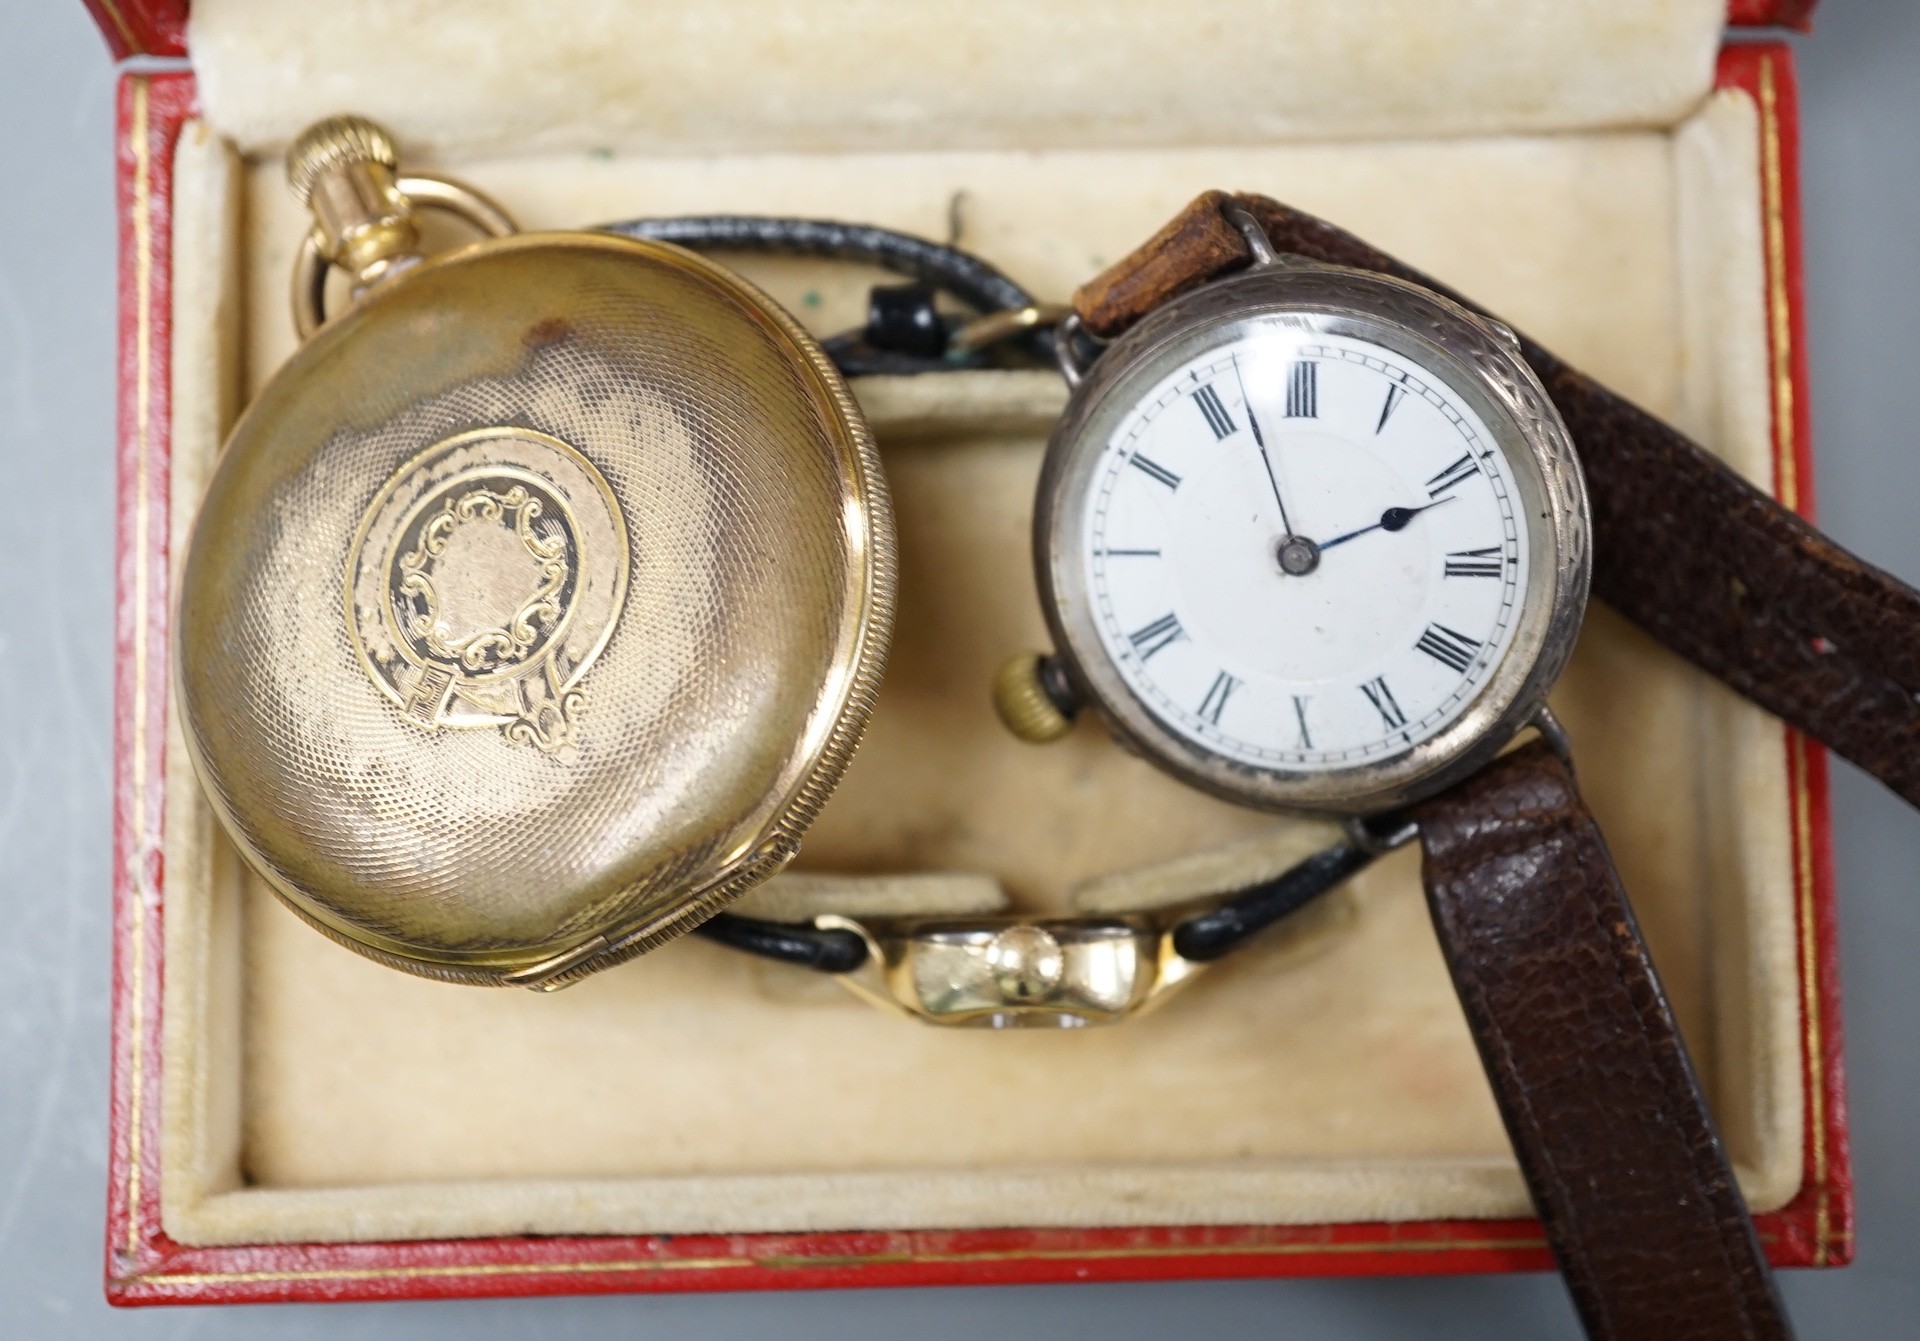 A lady's 10k gold filled Longines wrist watch, original box, a gold plated fob watch and a silver watch.